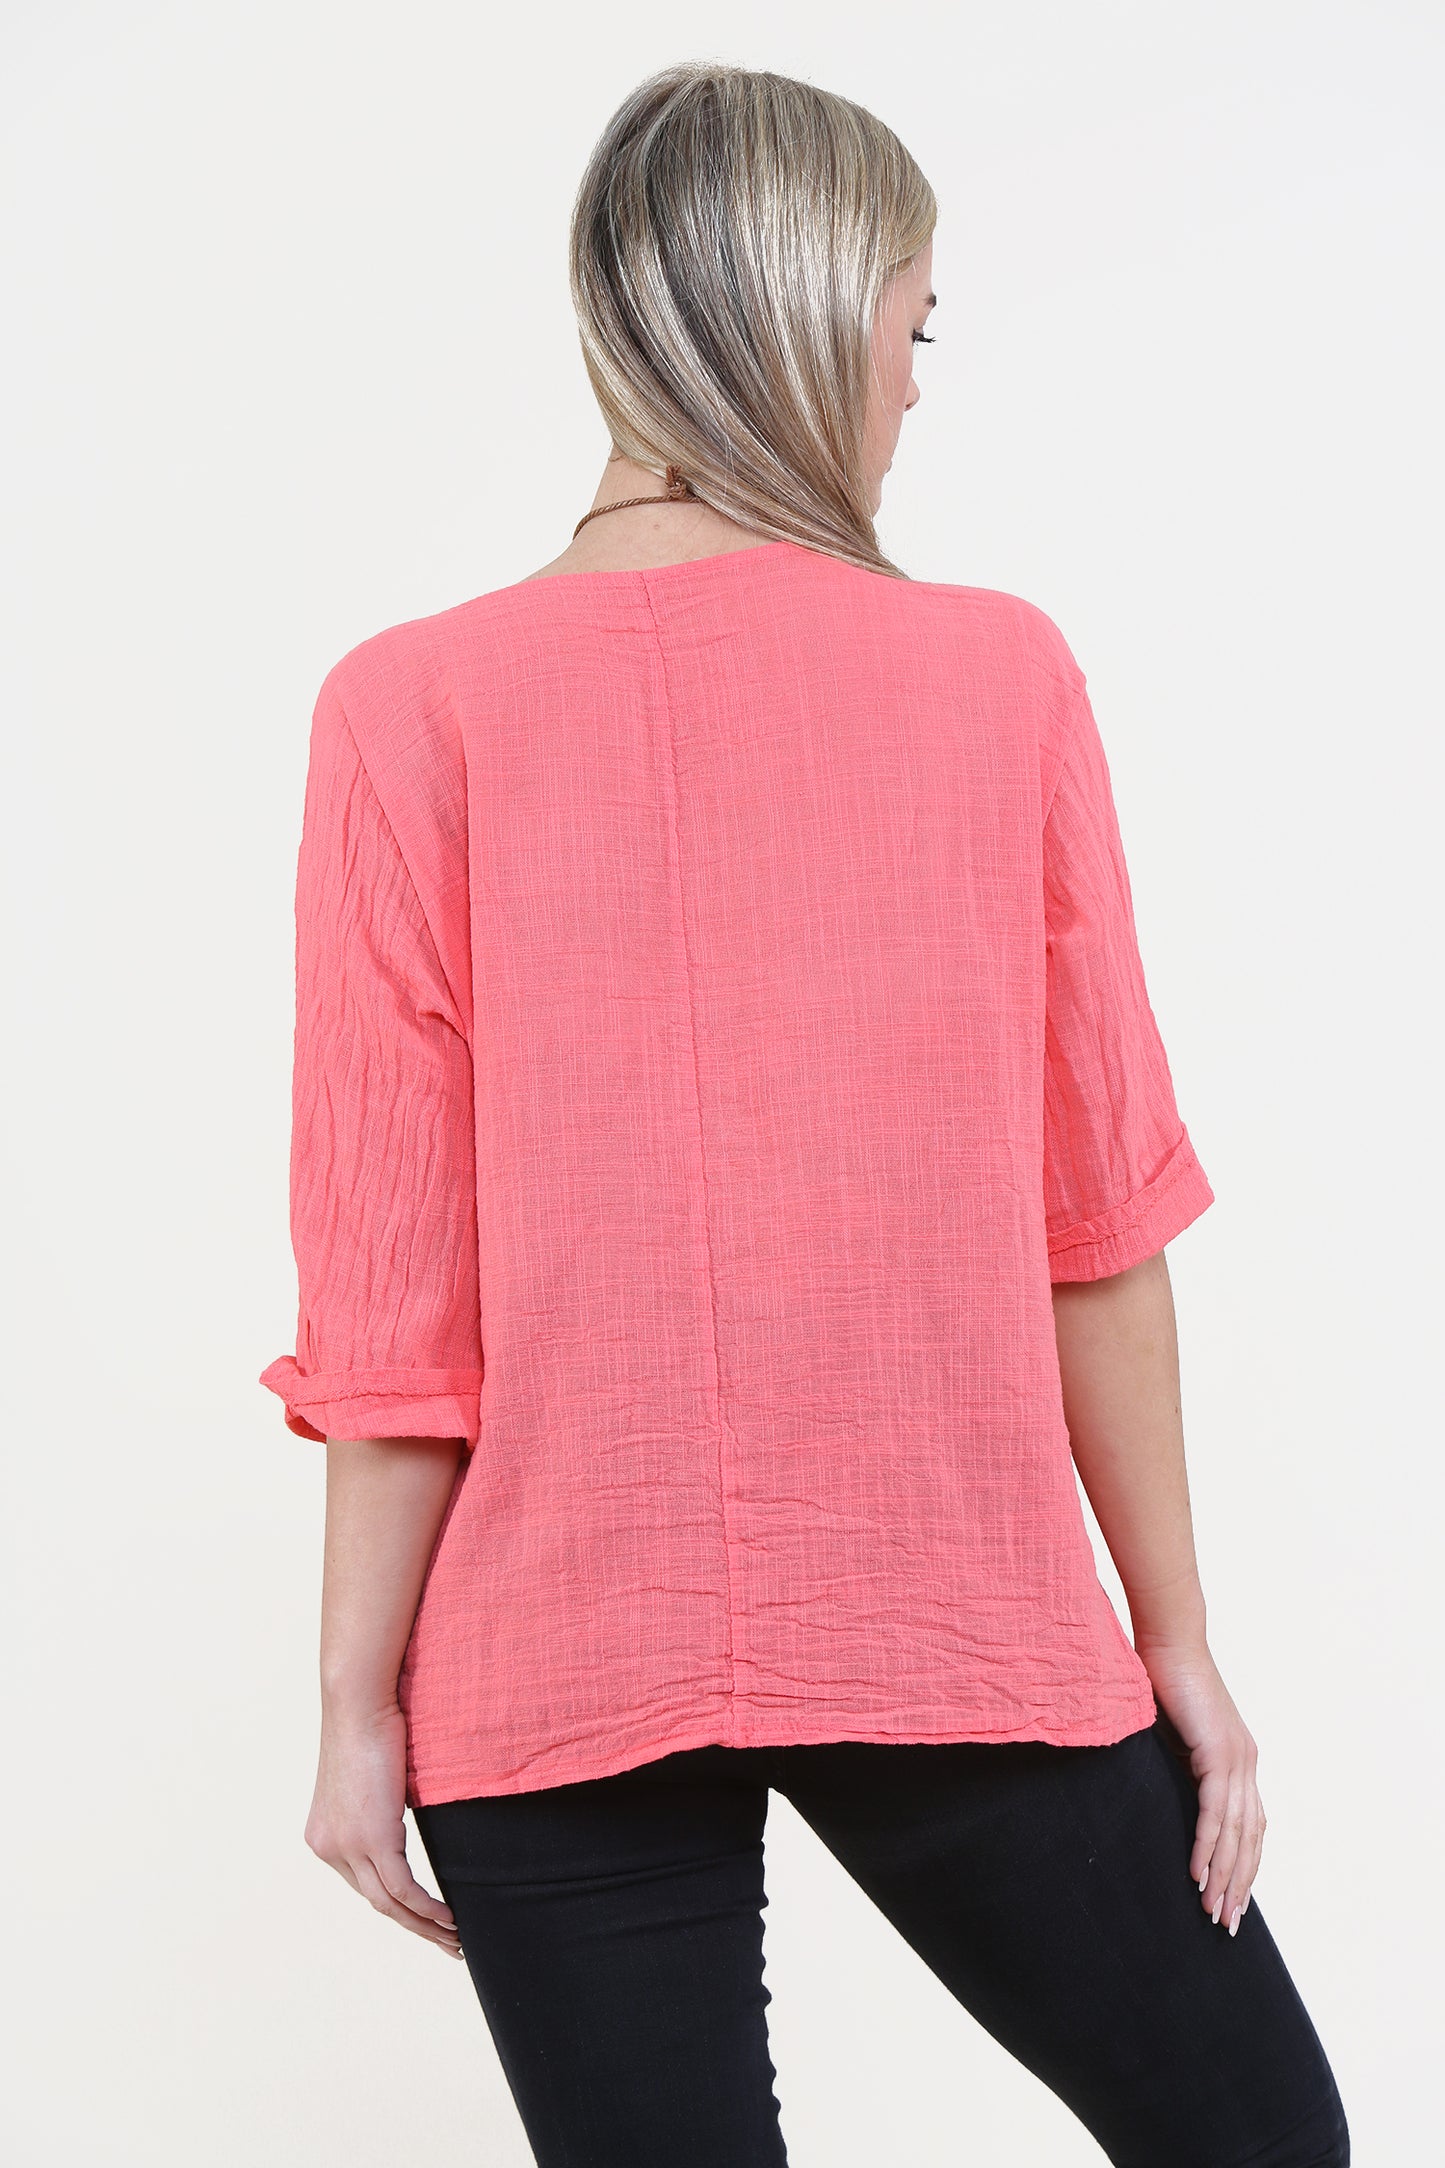 Women Coral Italian Cotton Top with Necklace